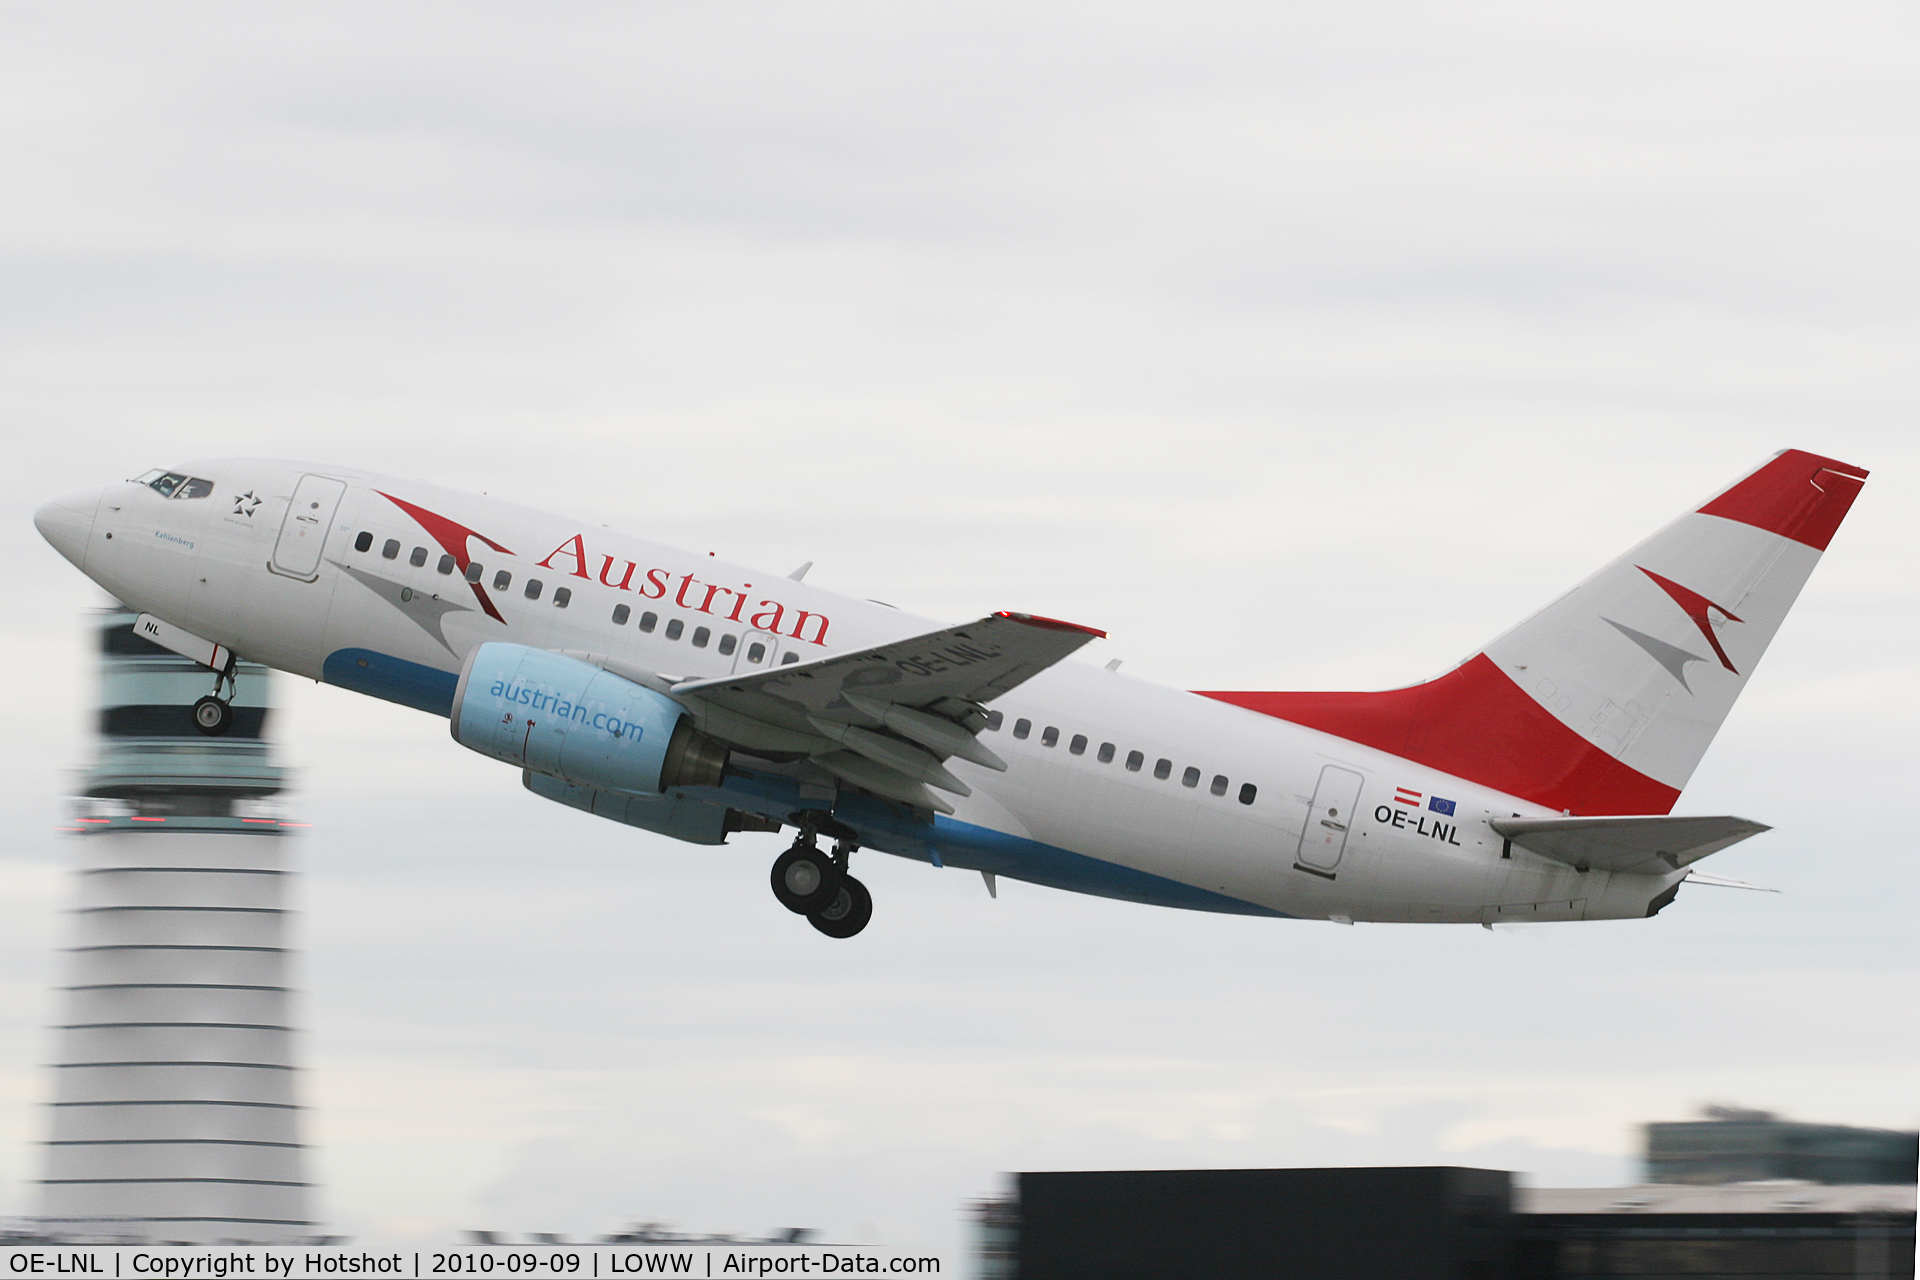 OE-LNL, 2000 Boeing 737-6Z9 C/N 30137, Departing with ATC Tower in the backdrop